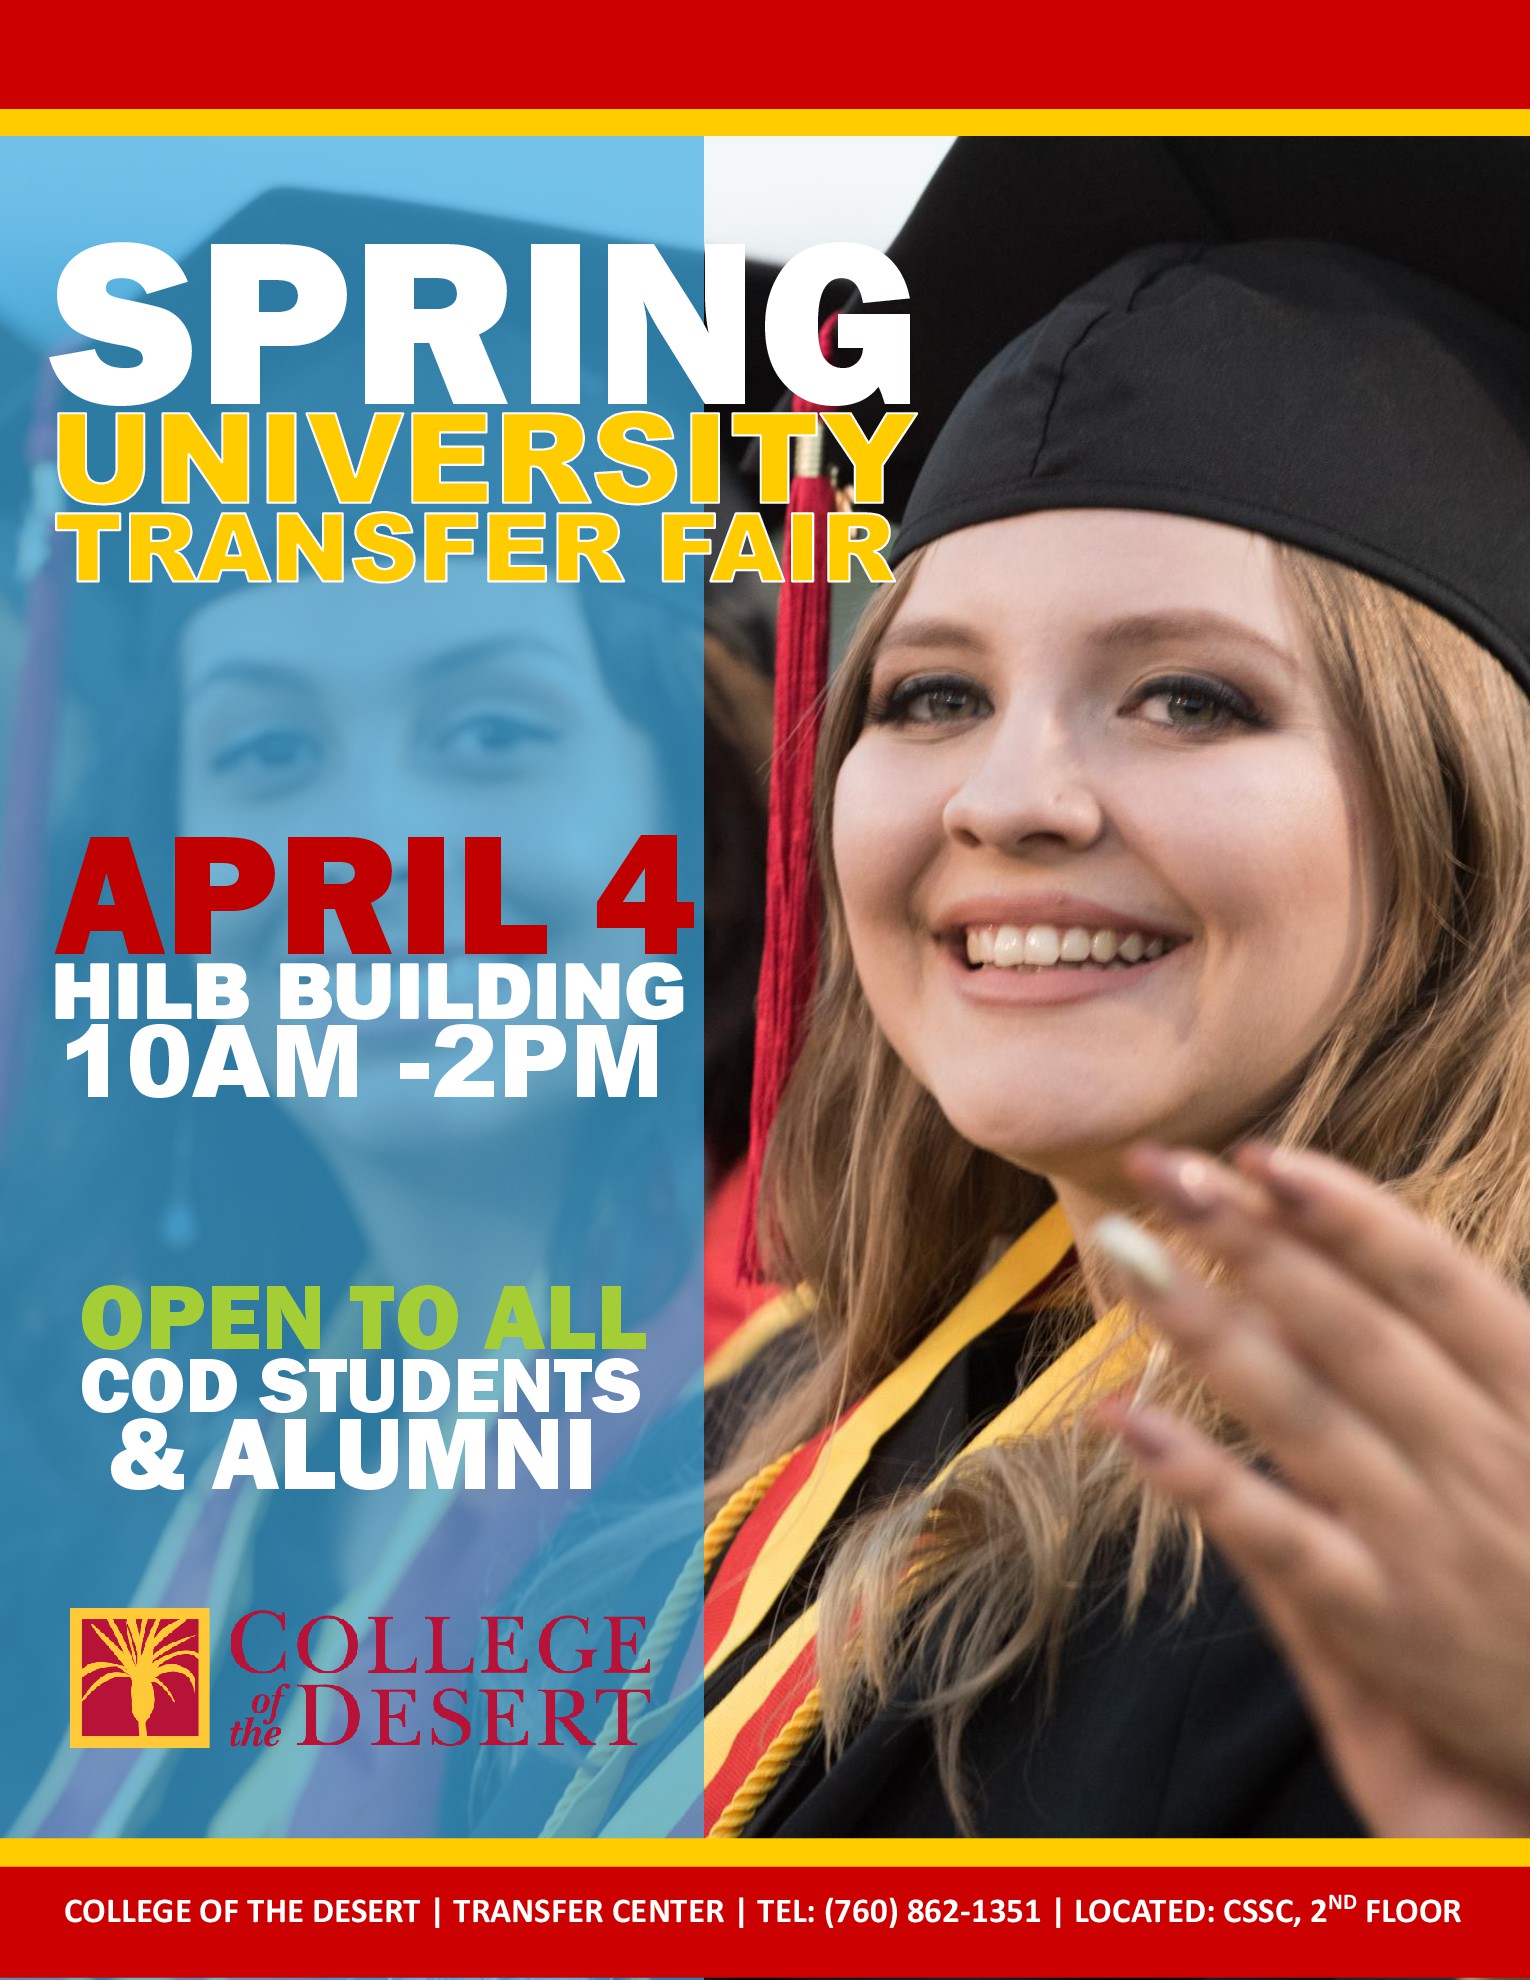 2017 Spring Transfer Fair on Tuesday, April 4, 2017 from 10am to 2pm in the Hilb Building